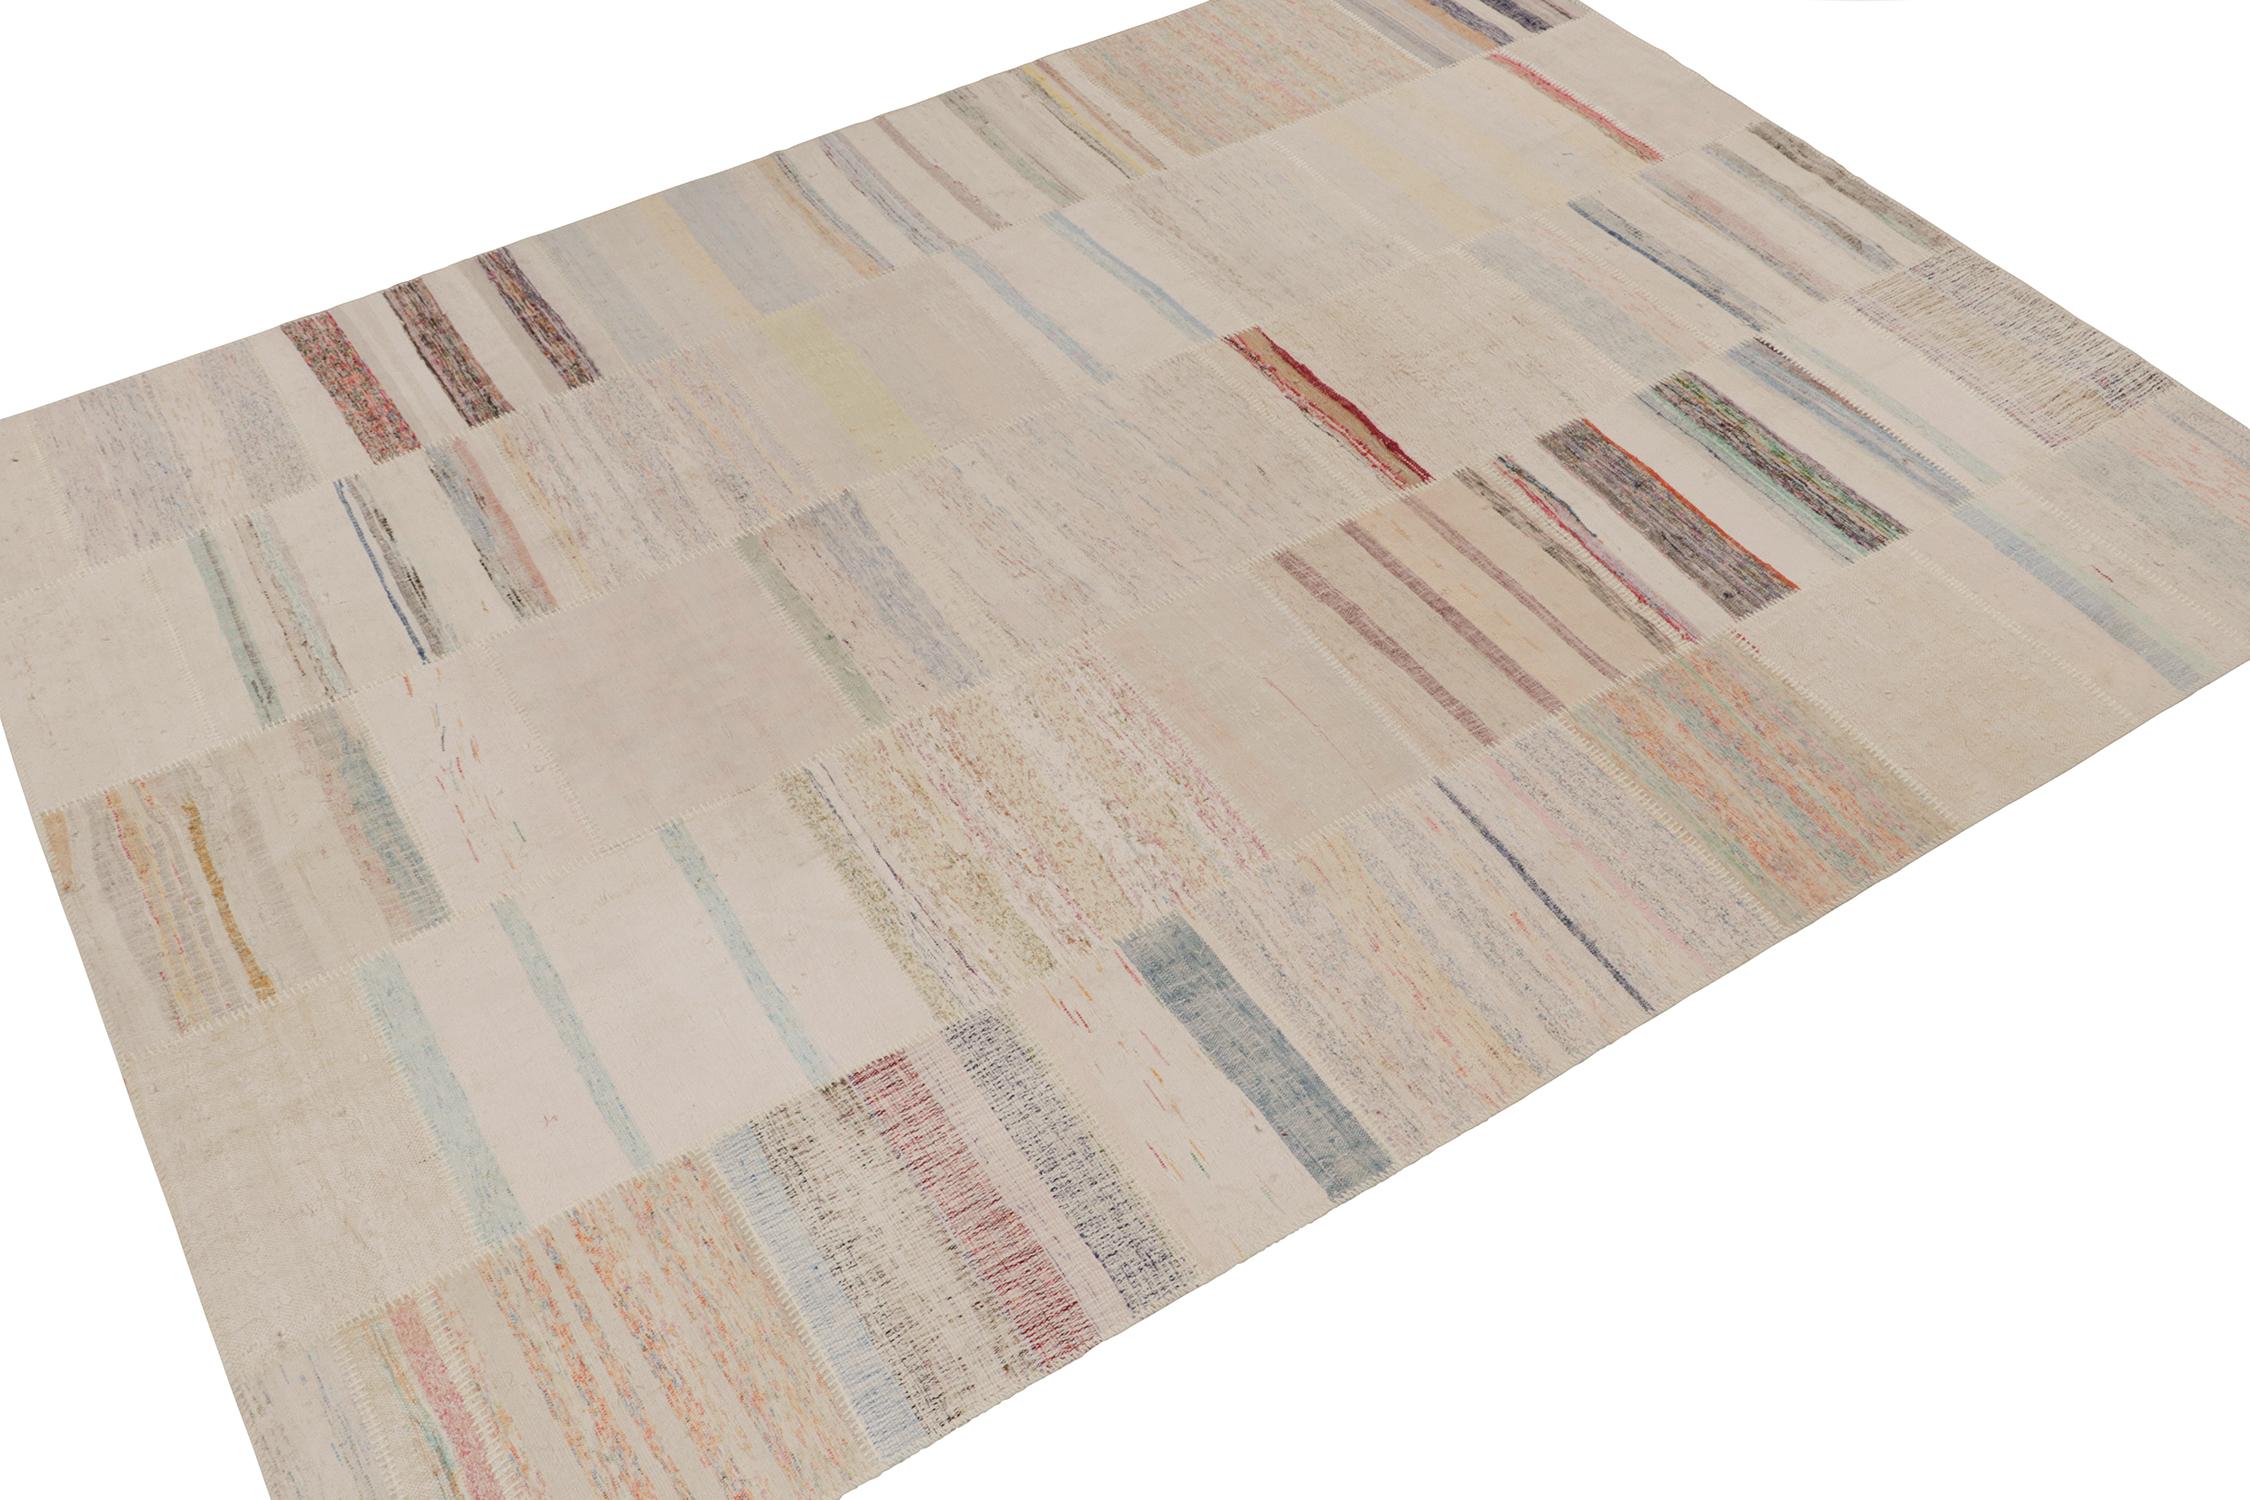 Rug & Kilim presents a contemporary 9x12 rug from their innovative new patchwork kilim collection. 

On the Design: 

This flat weave technique repurposes vintage yarns in polychromatic stripes and striae, achieving a playful look with fabulous